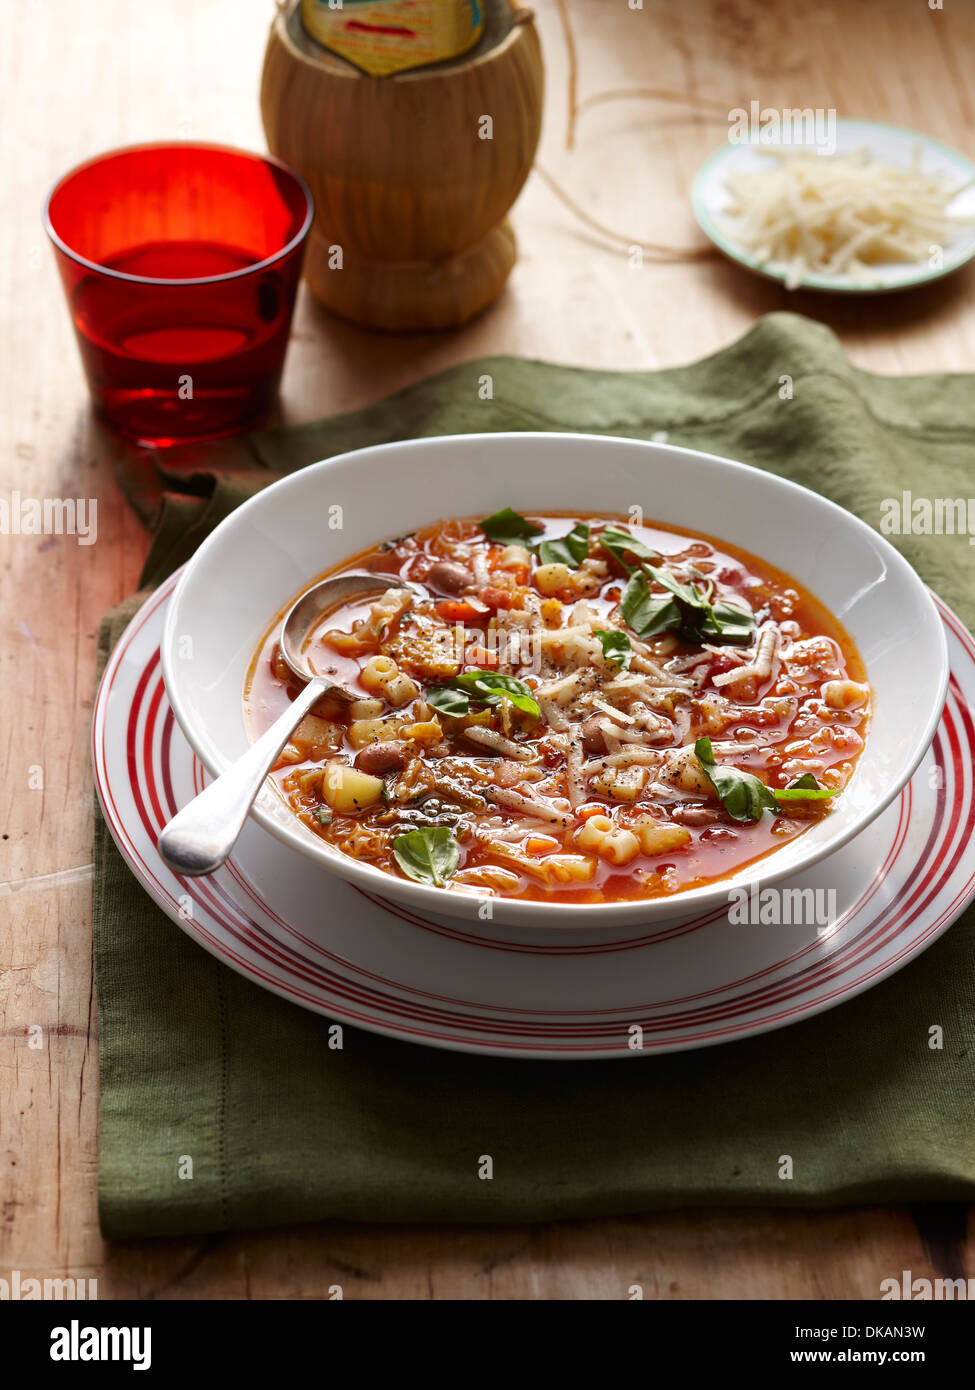 Still life with bowl of minestrone soup Stock Photo